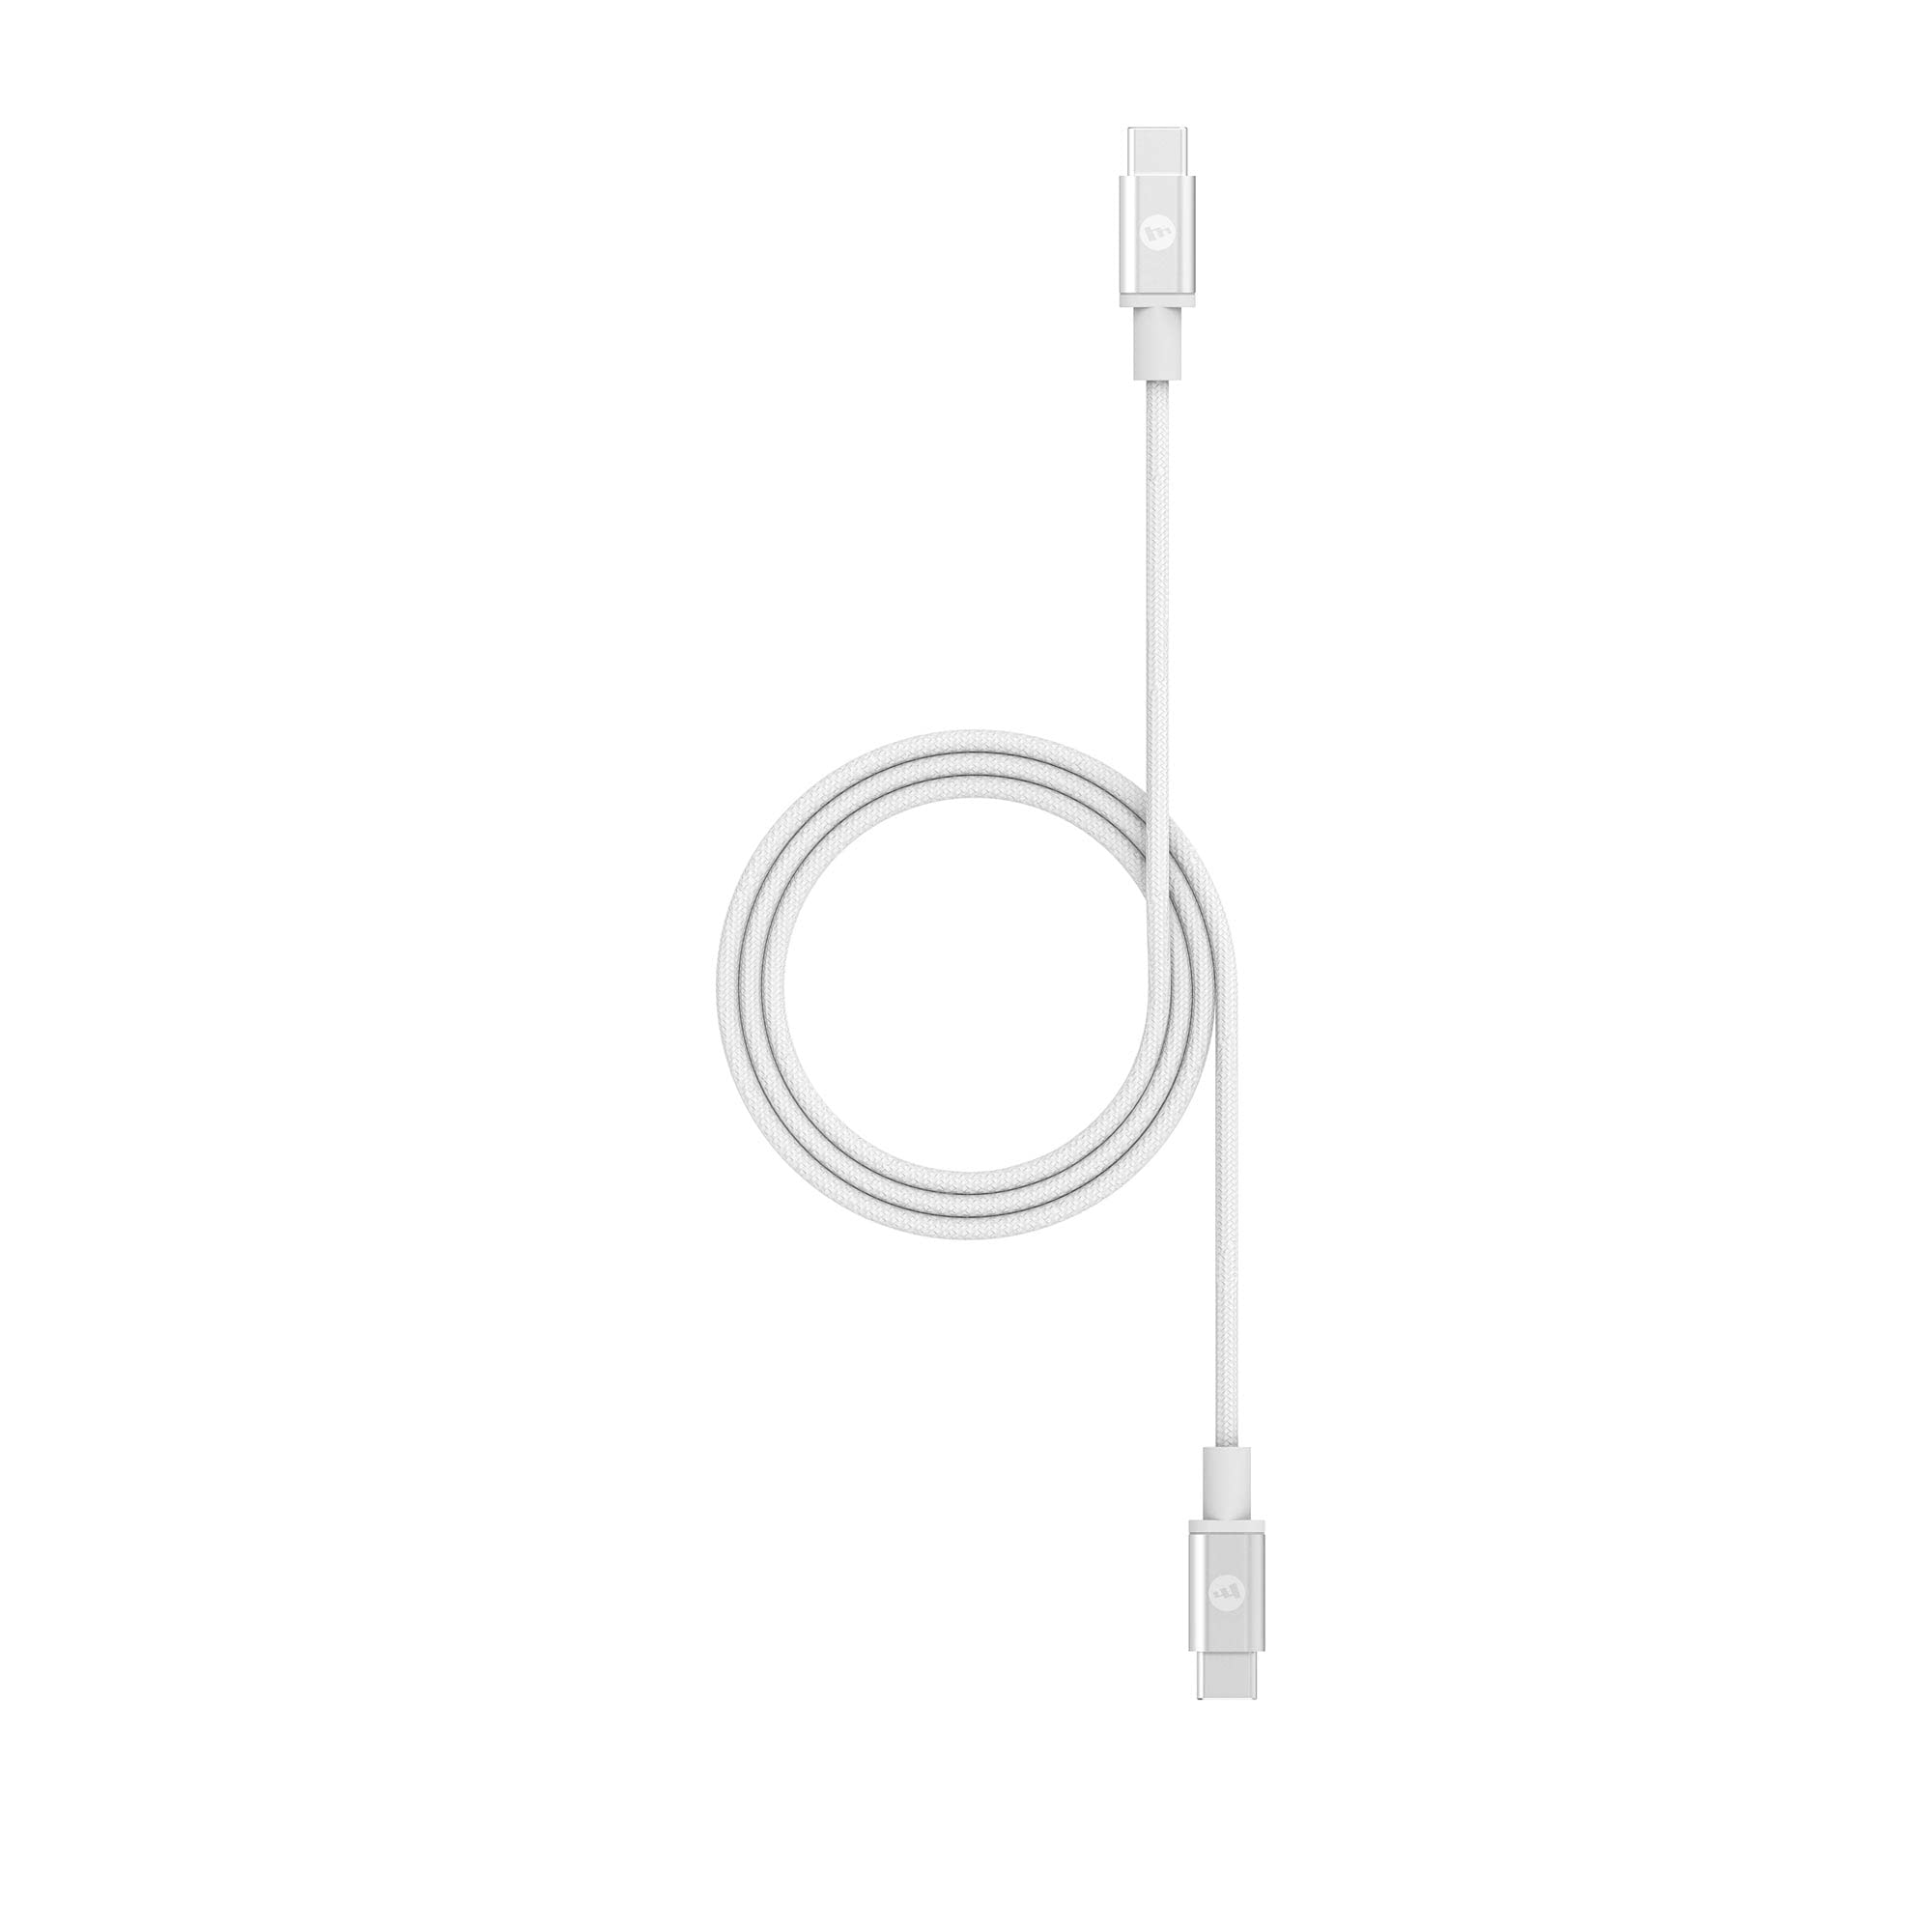 CABLE USB-C TO USB-C 1.5M WHITE